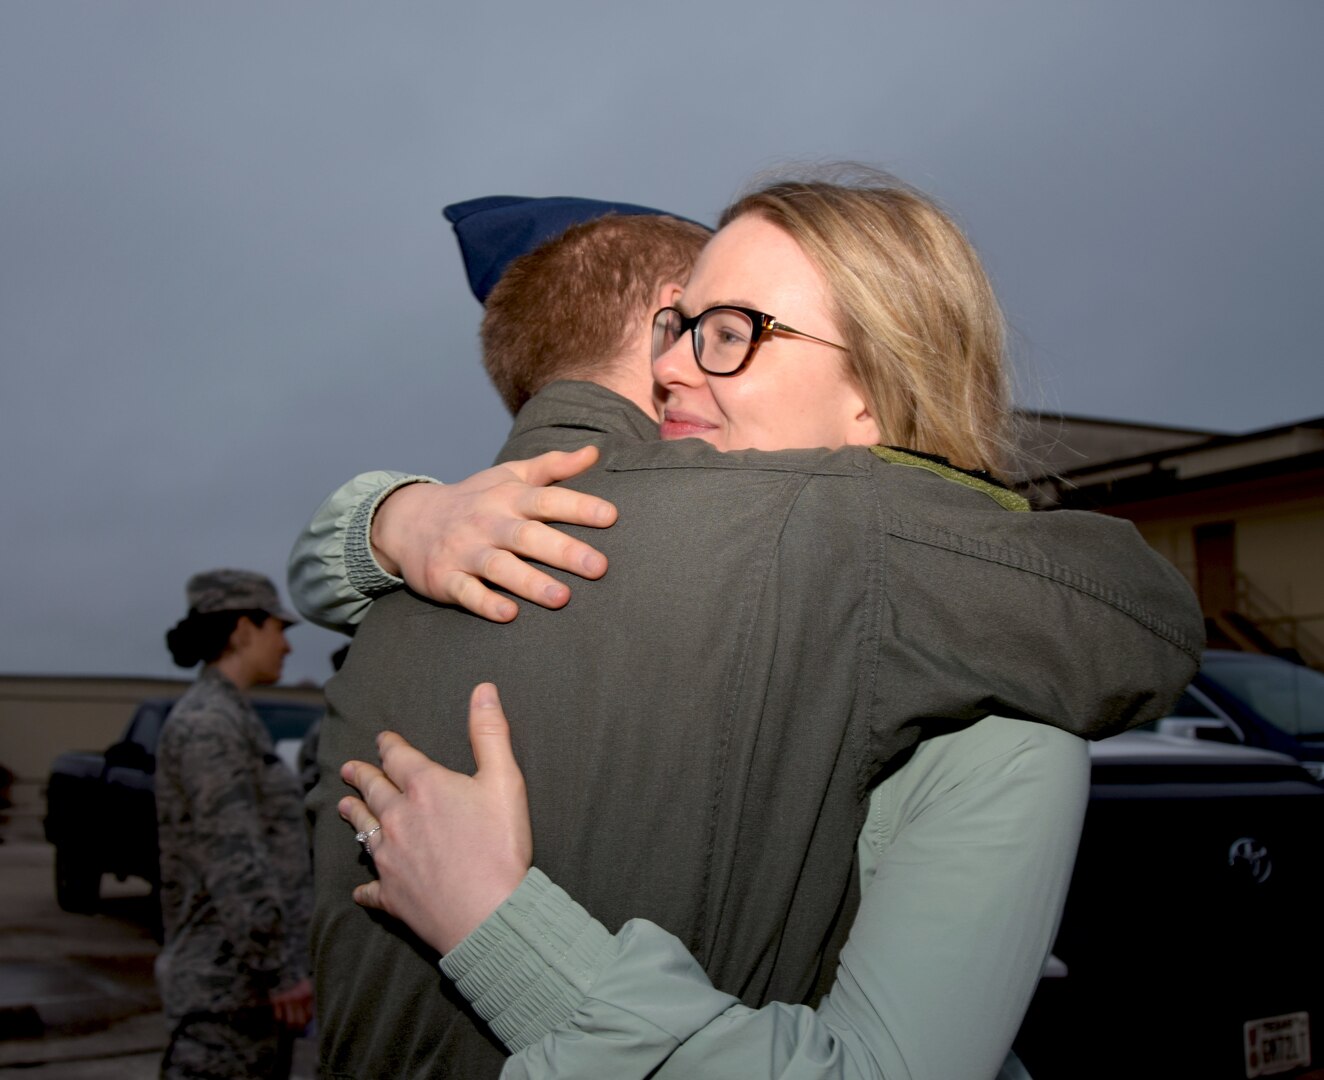 Staff Sgt. Geoffrey Brunelle, 433rd Airlift Wing medical technician, hugs his wife goodbye before departing Joint Base San Antonio-Lackland, Texas, to respond to the COVID-19 crisis April 5, 2020.